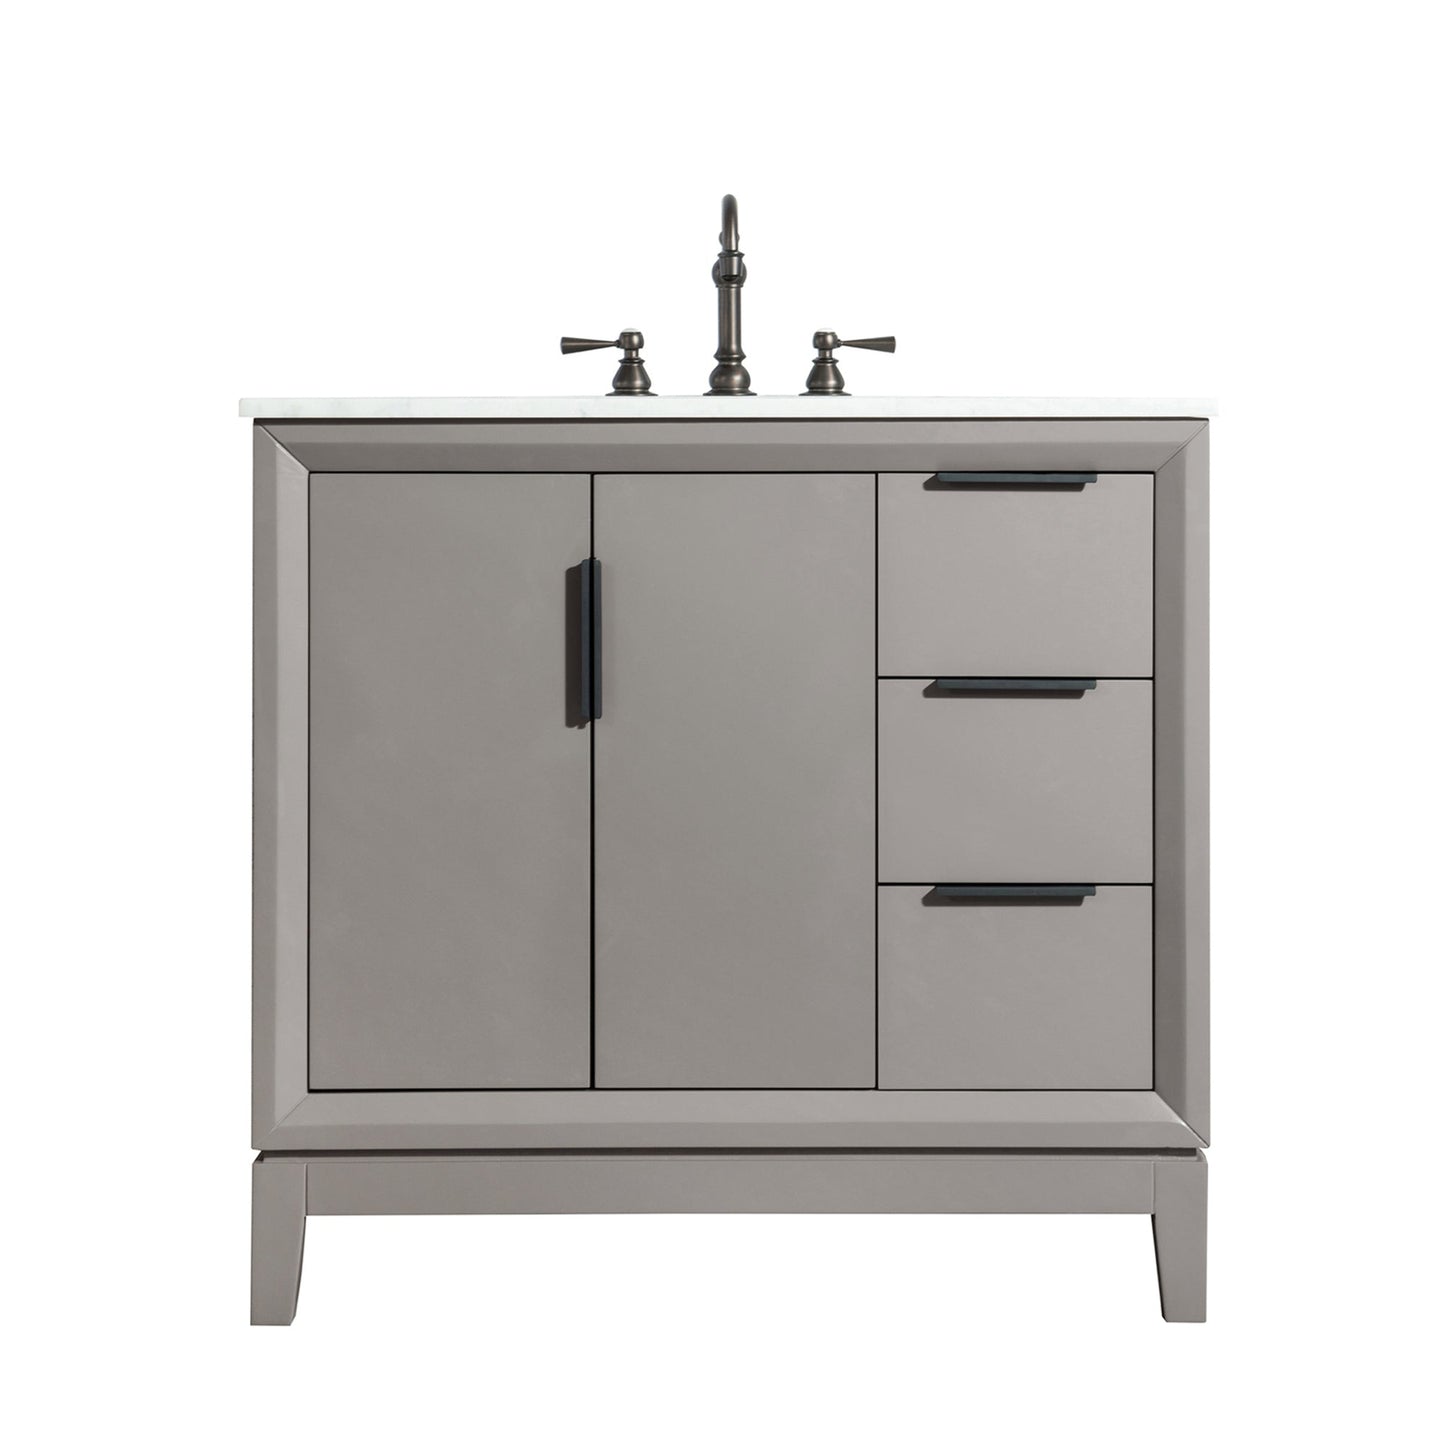 Water Creation Elizabeth 36" Single Sink Carrara White Marble Vanity In Cashmere Grey With F2-0012-03-TL Lavatory Faucet